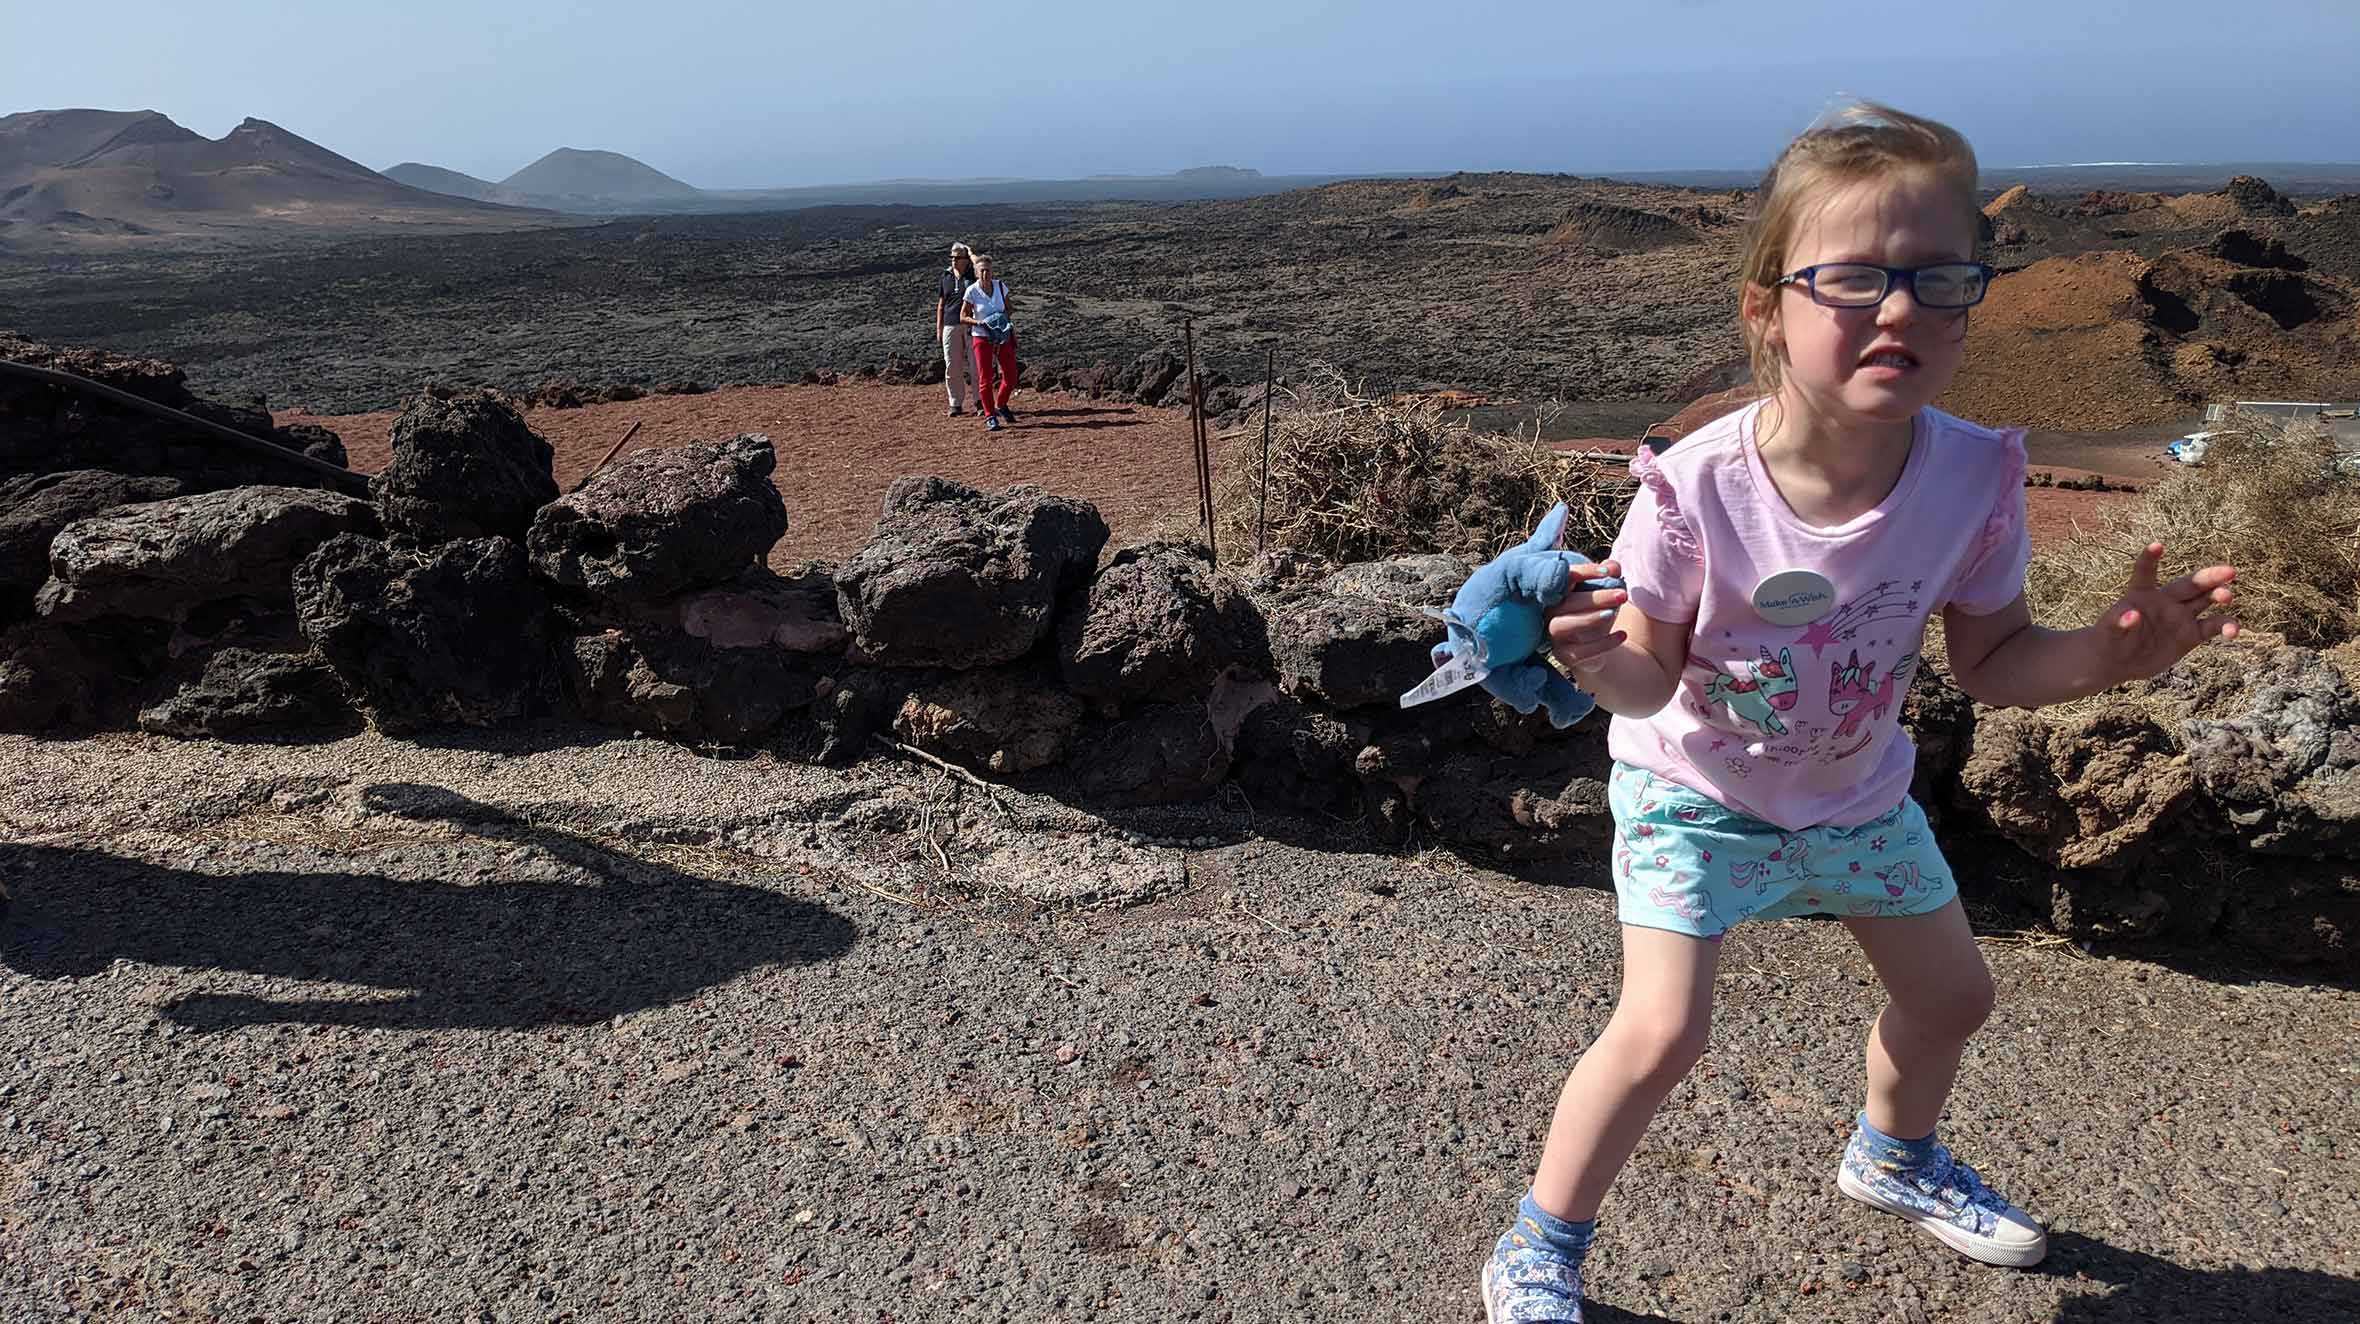 Hope during her trip to see see a volcano, with rugged scenery in the background.